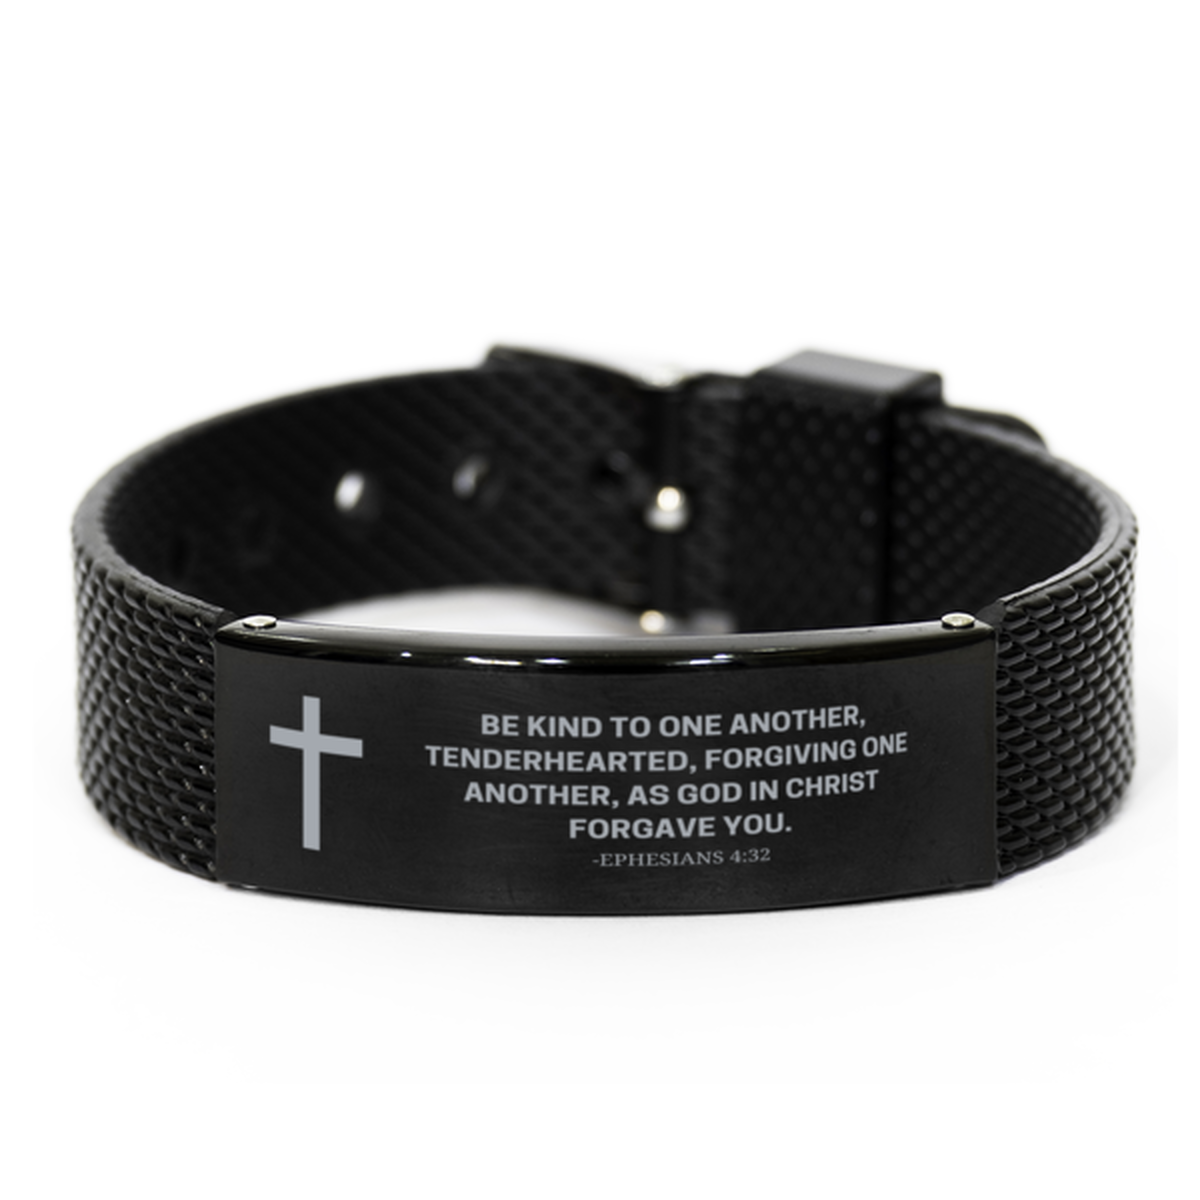 Baptism Gifts For Teenage Boys Girls, Christian Bible Verse Black Shark Mesh Bracelet, Be kind to one another, Catholic Confirmation Gifts for Son, Godson, Grandson, Nephew